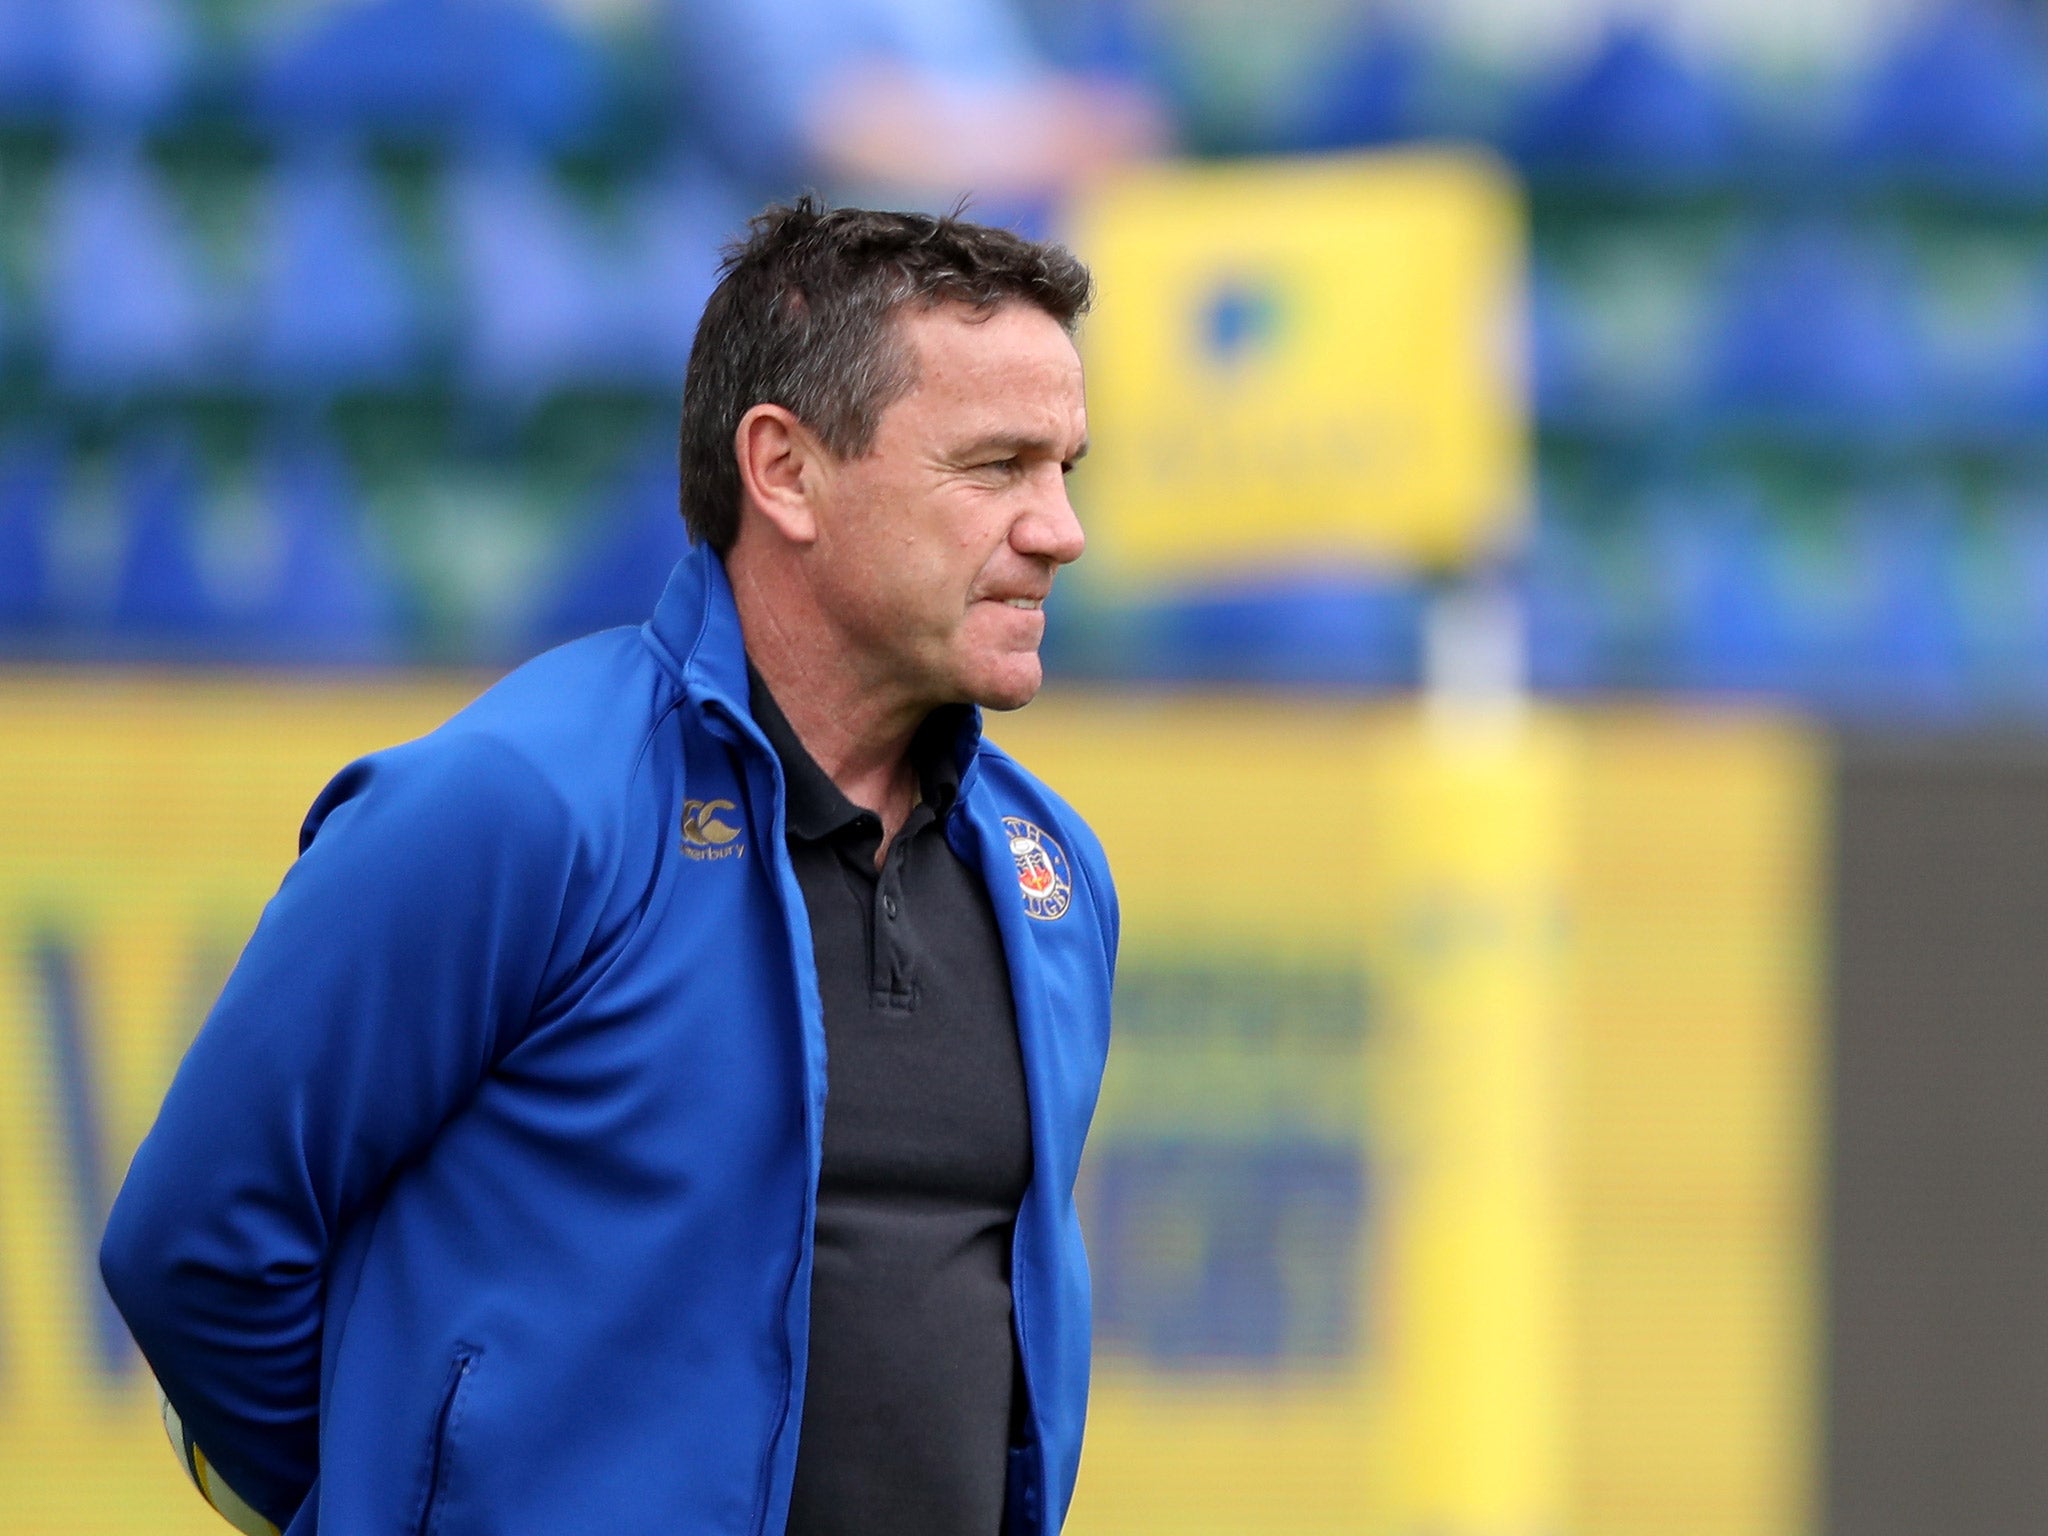 Mike Ford has left Bath after a disappointing season